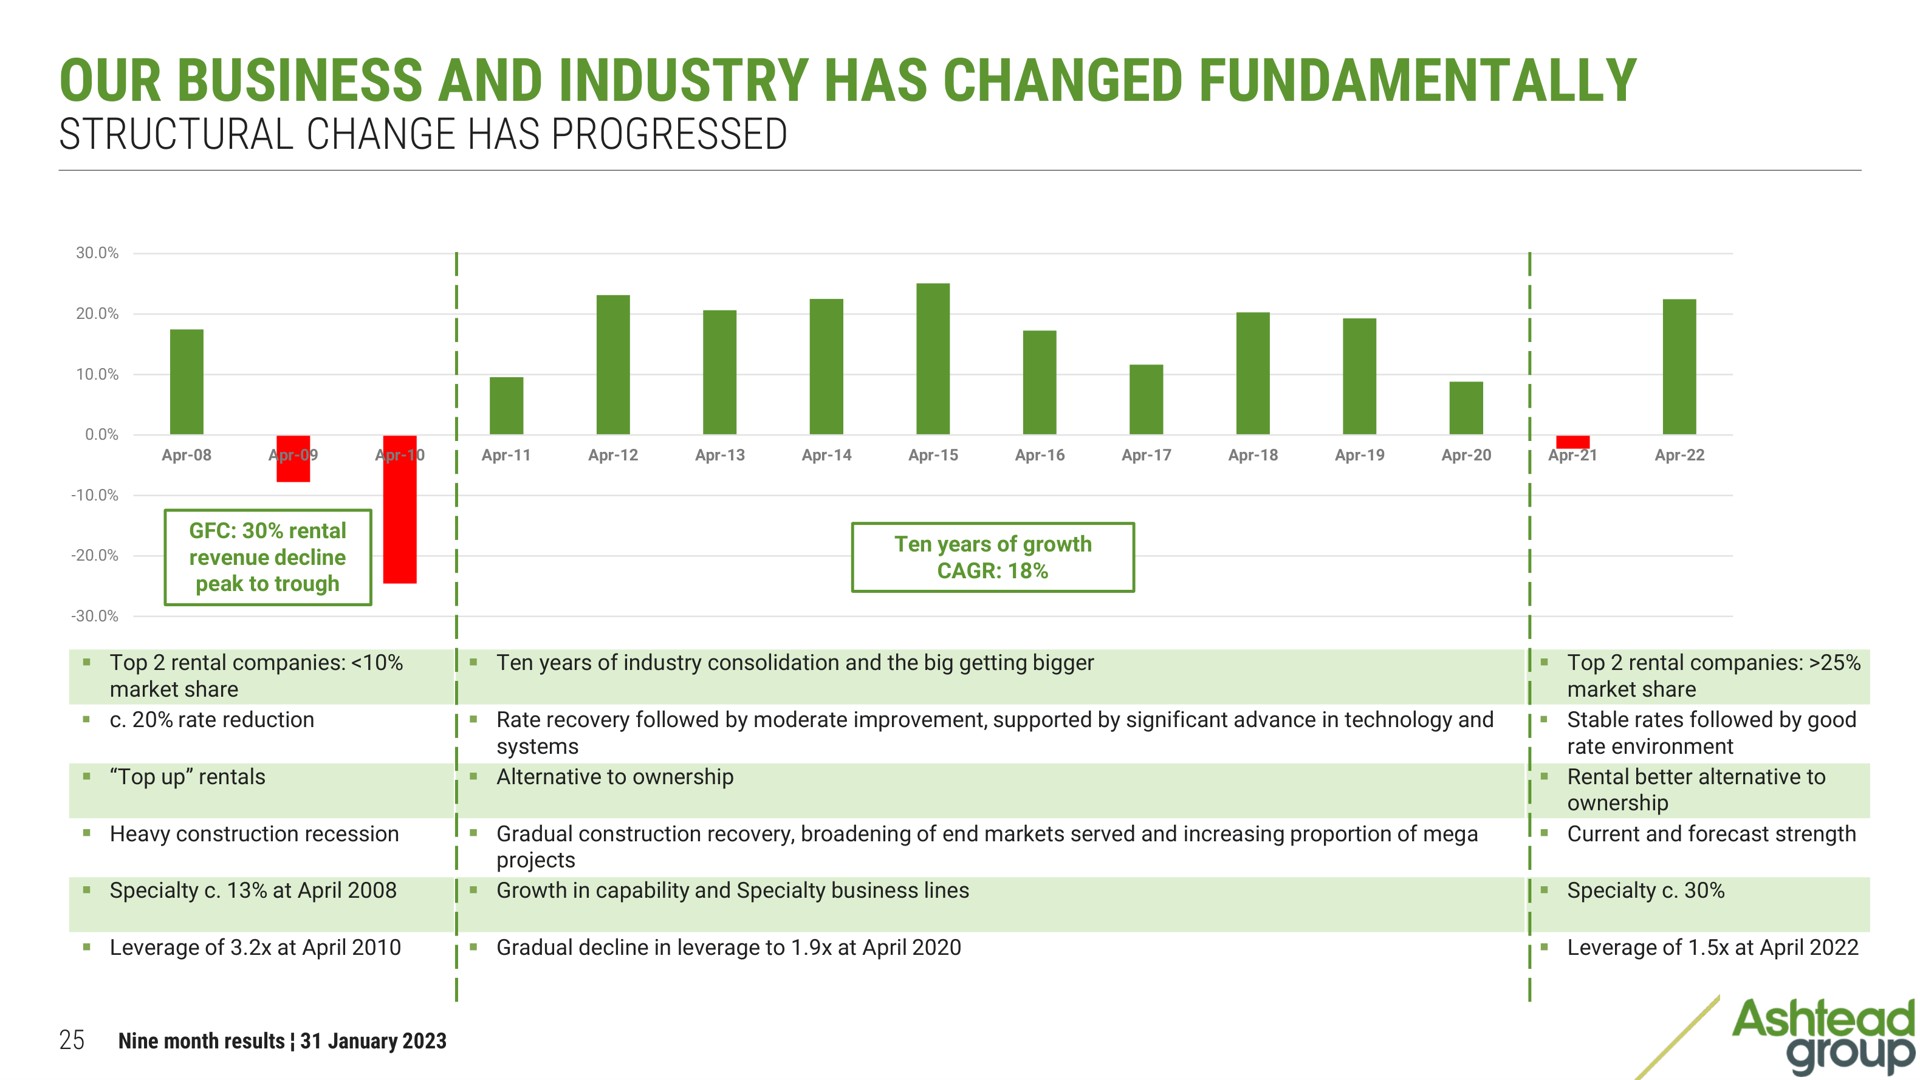 our business and industry has changed fundamentally structural change progressed | Ashtead Group